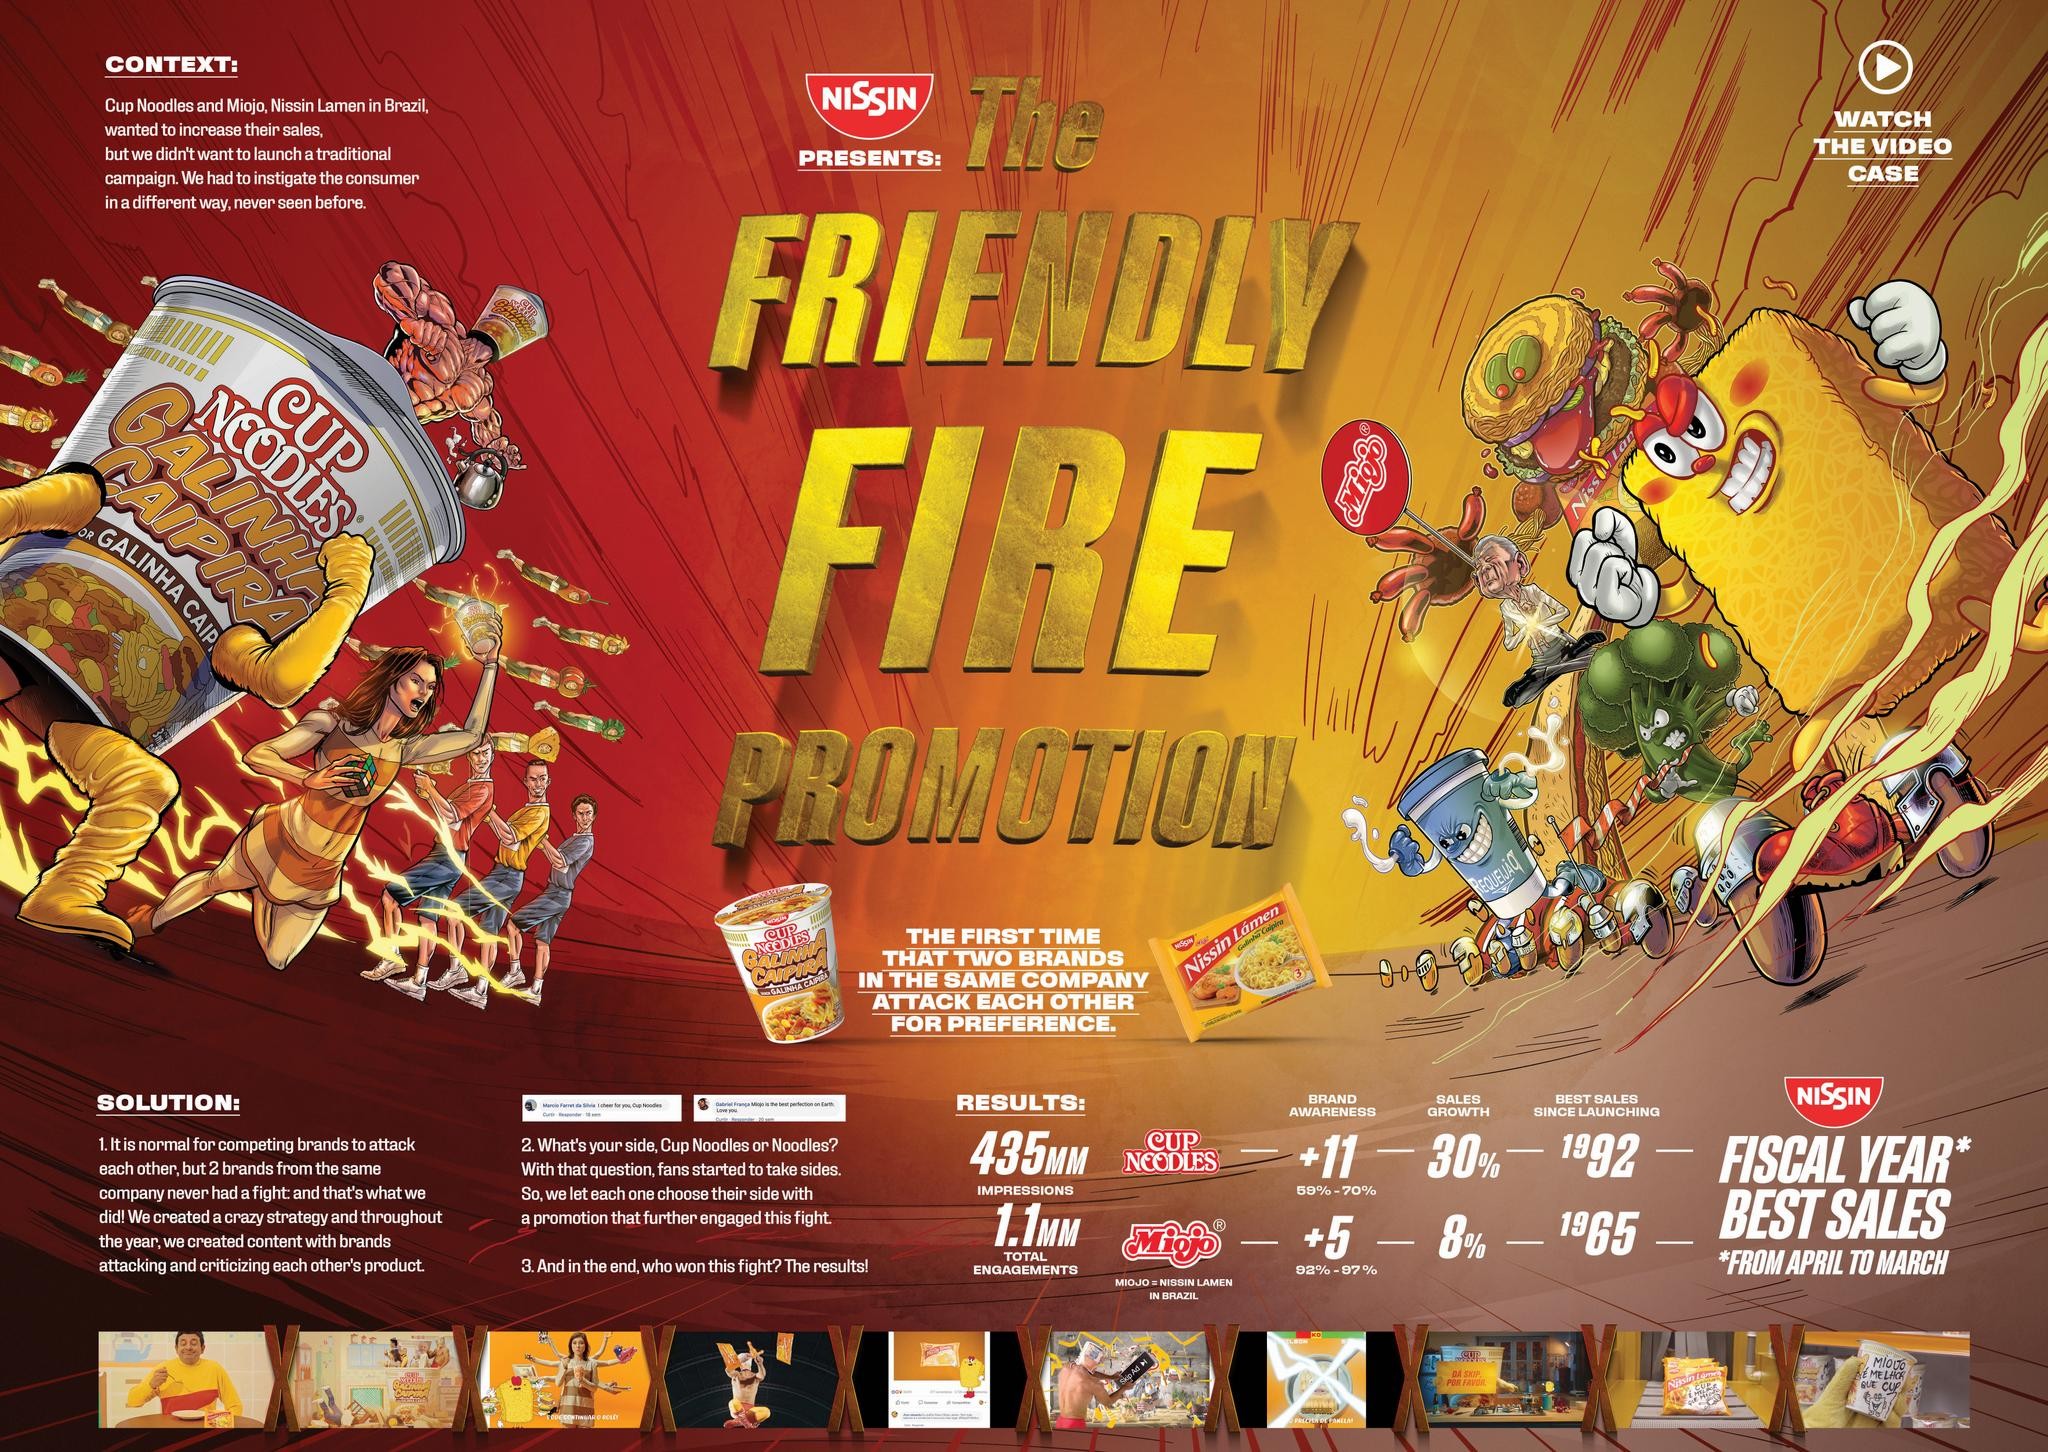 THE FRIENDLY FIRE PROMOTION